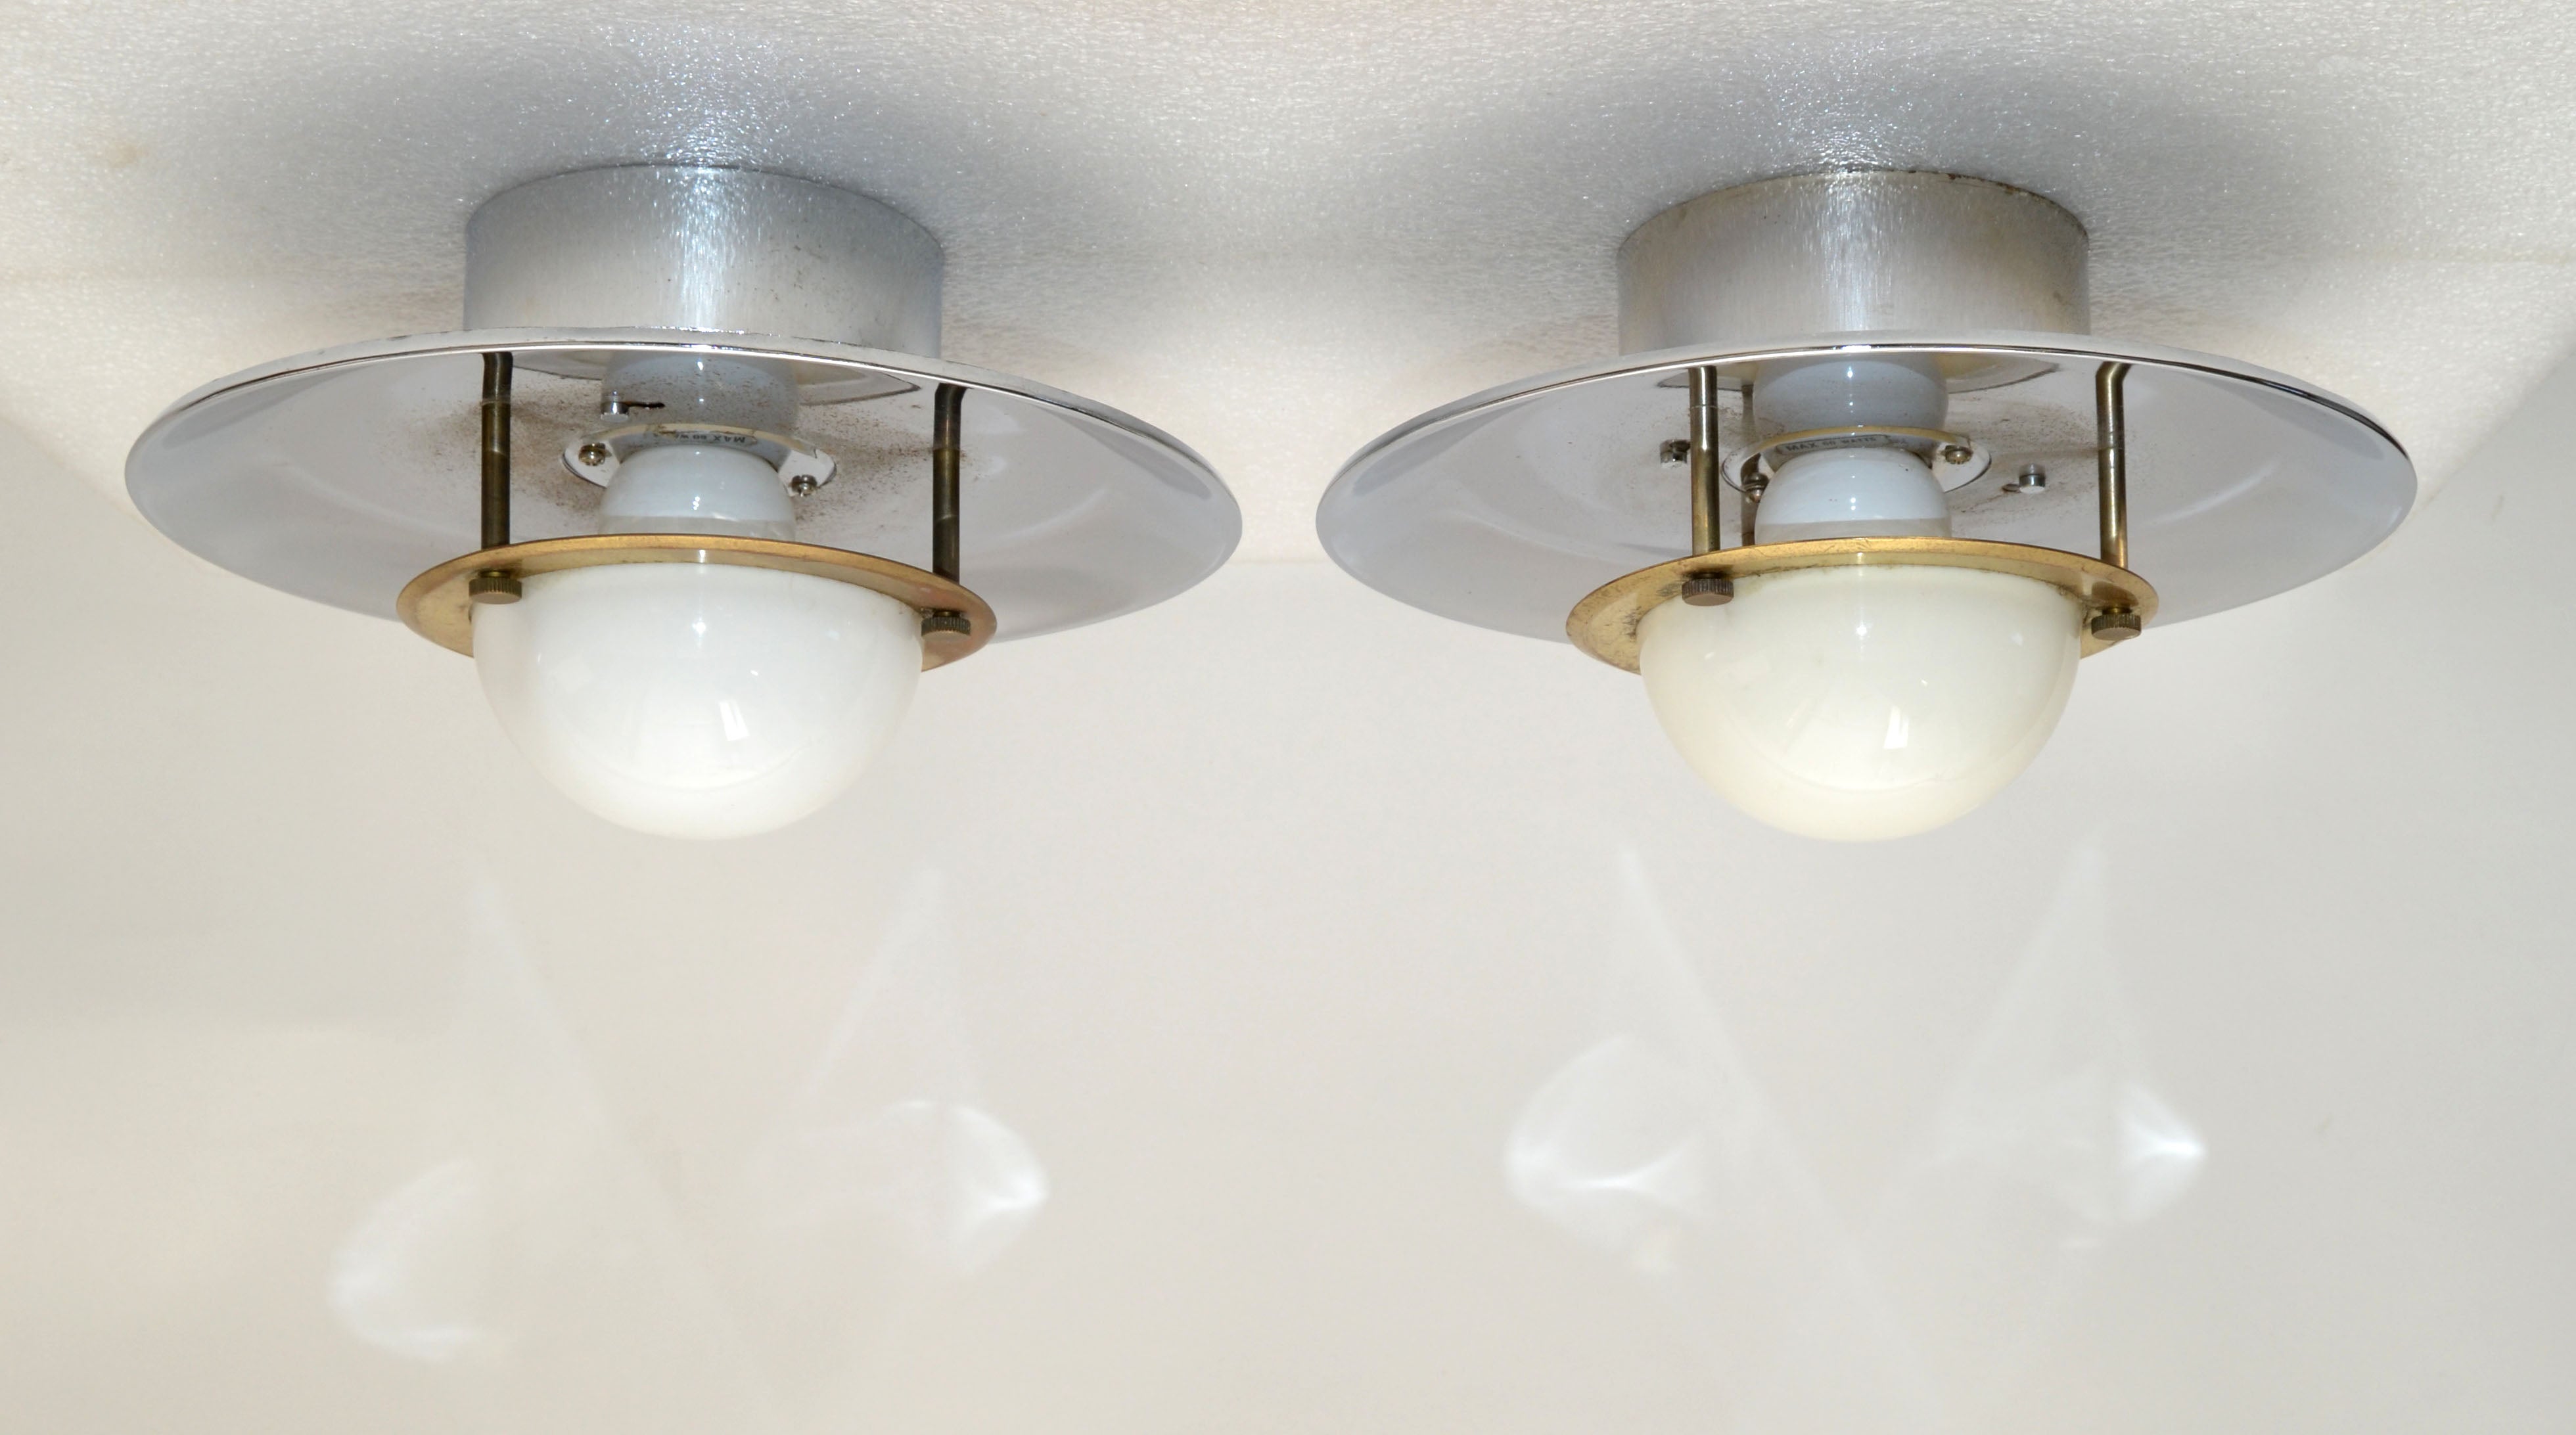 Pair of Mid-Century Modern round chrome, brass sconces, wall light or flush mount.
Unique way of attaching the socket part to the Top, easy to change the light bulbs, just turn into the 2 holes and click.
US wiring and each takes a small regular 60